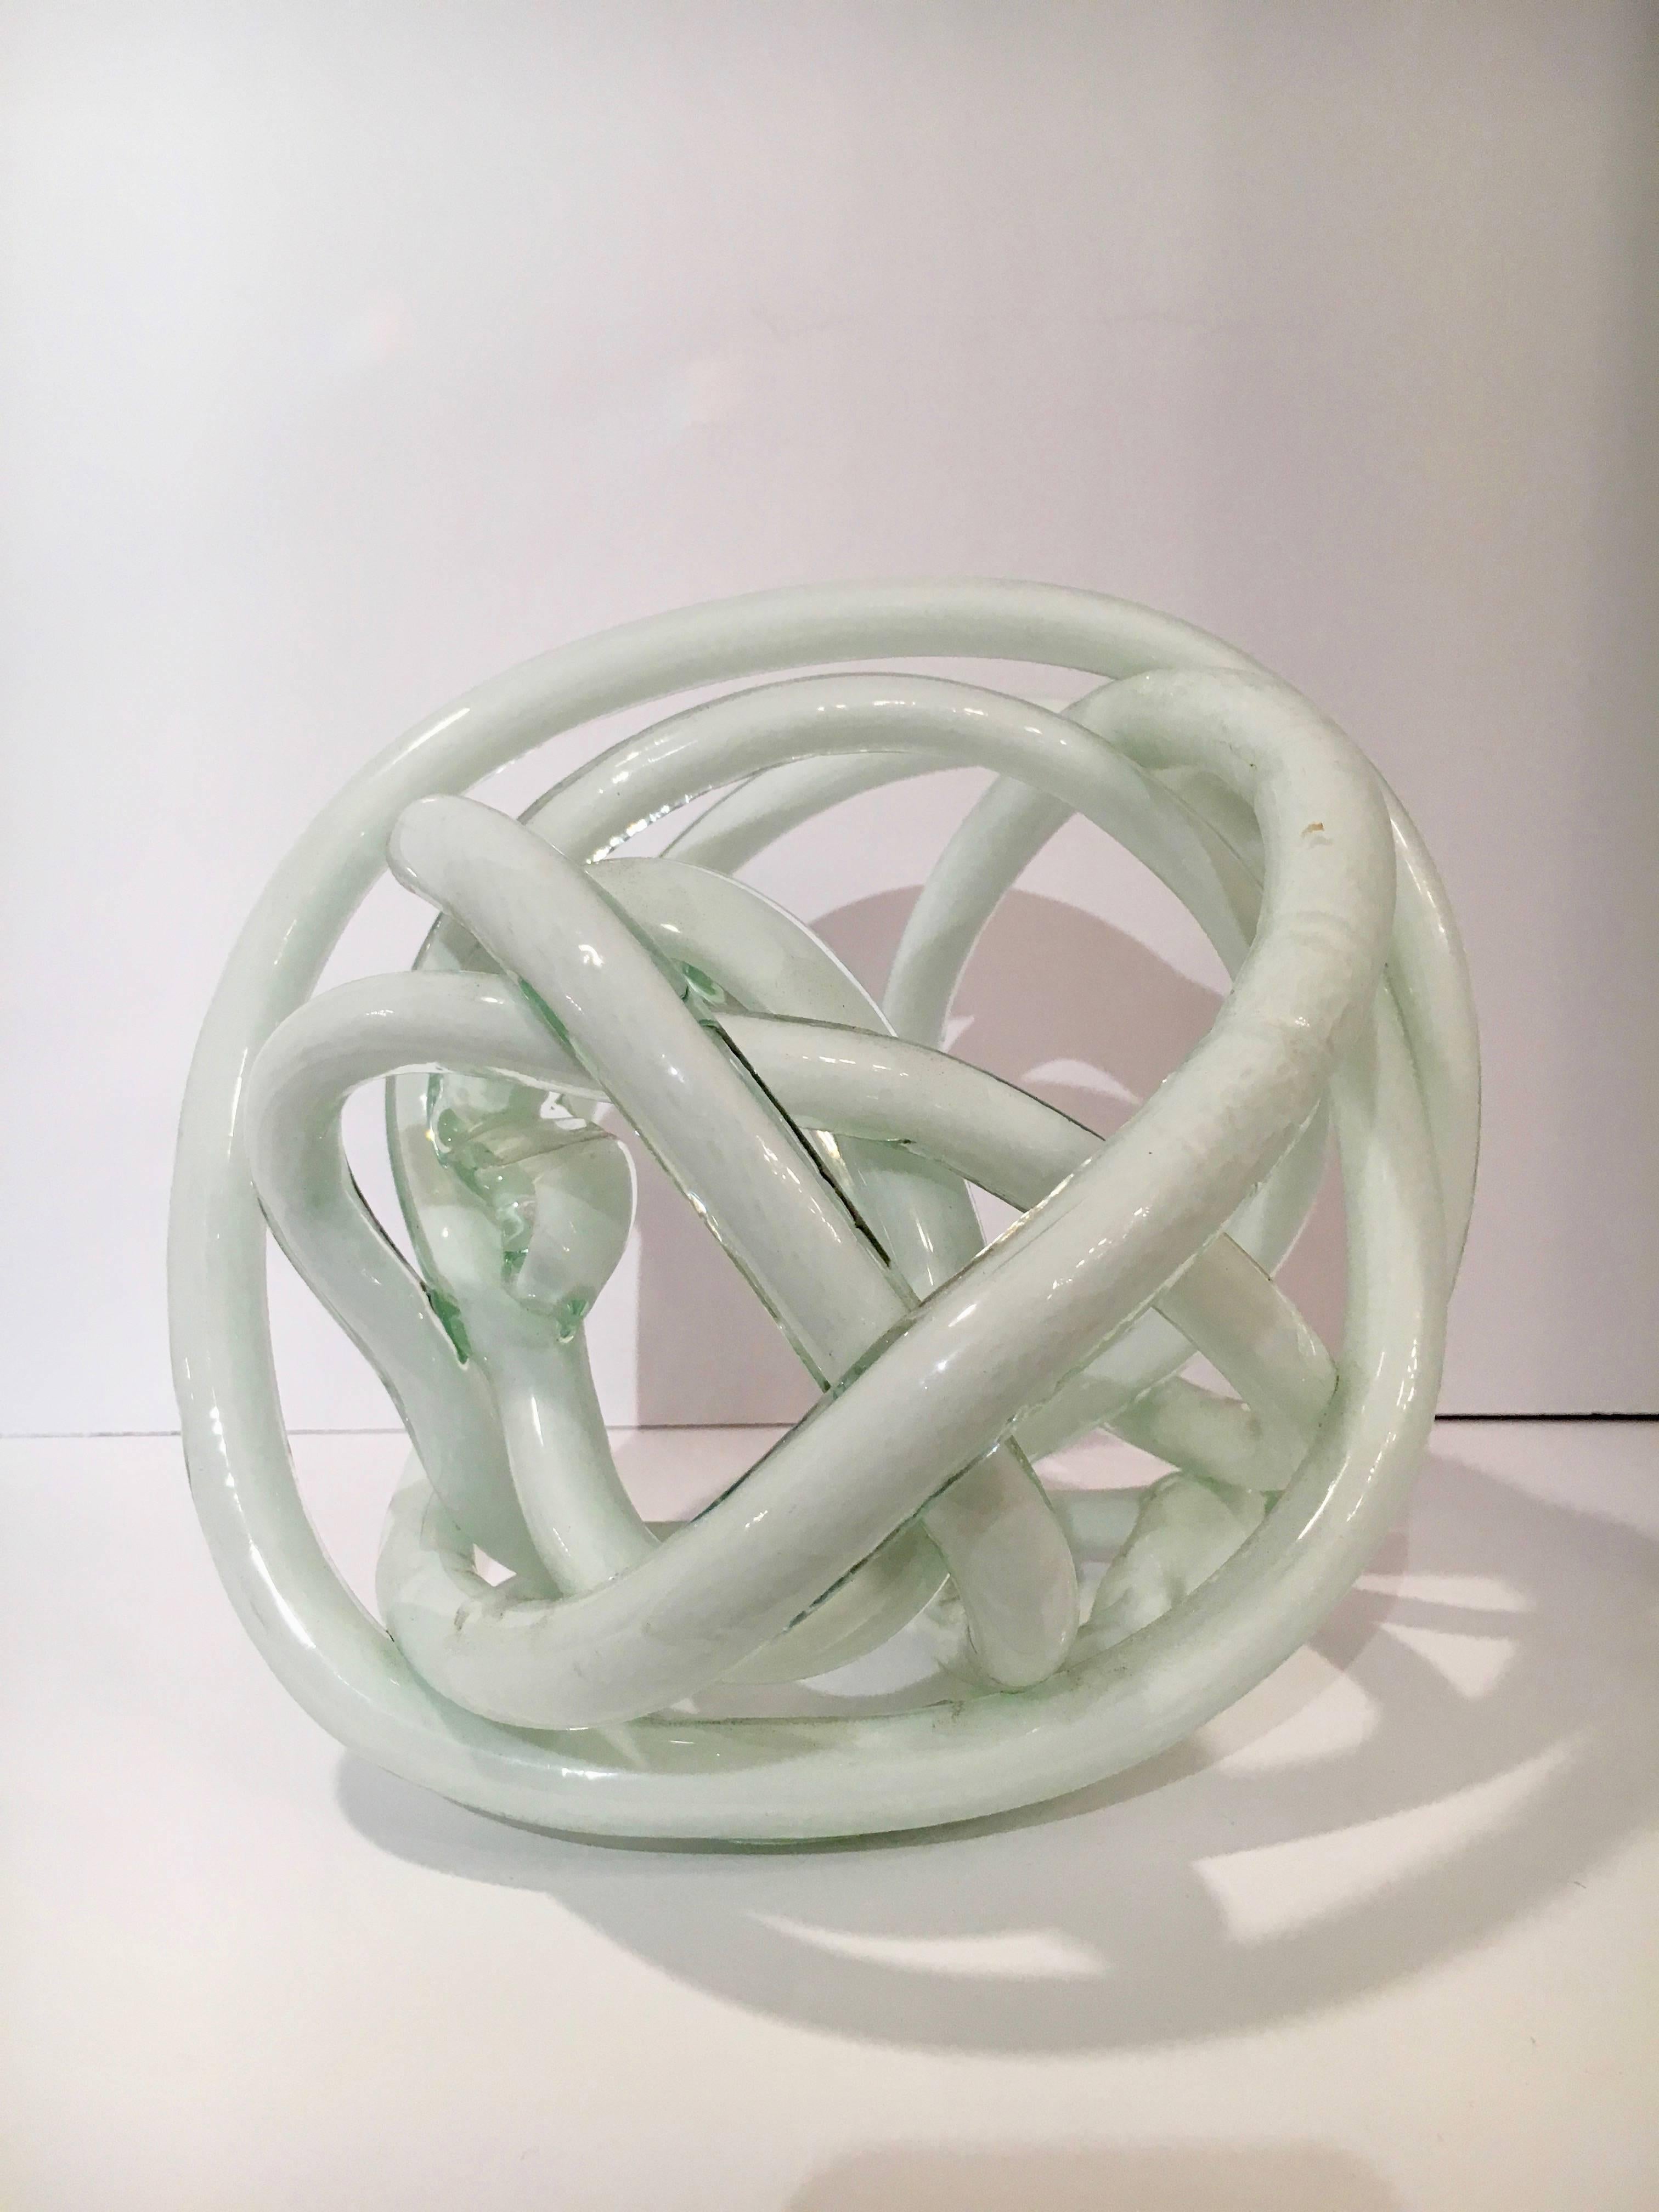 Twisted or Spaghetti Italian Murano Glass Sculpture - a compliment to the desk or any shelf - also a handsome bookend.  Glass is a milky white with a green cast
